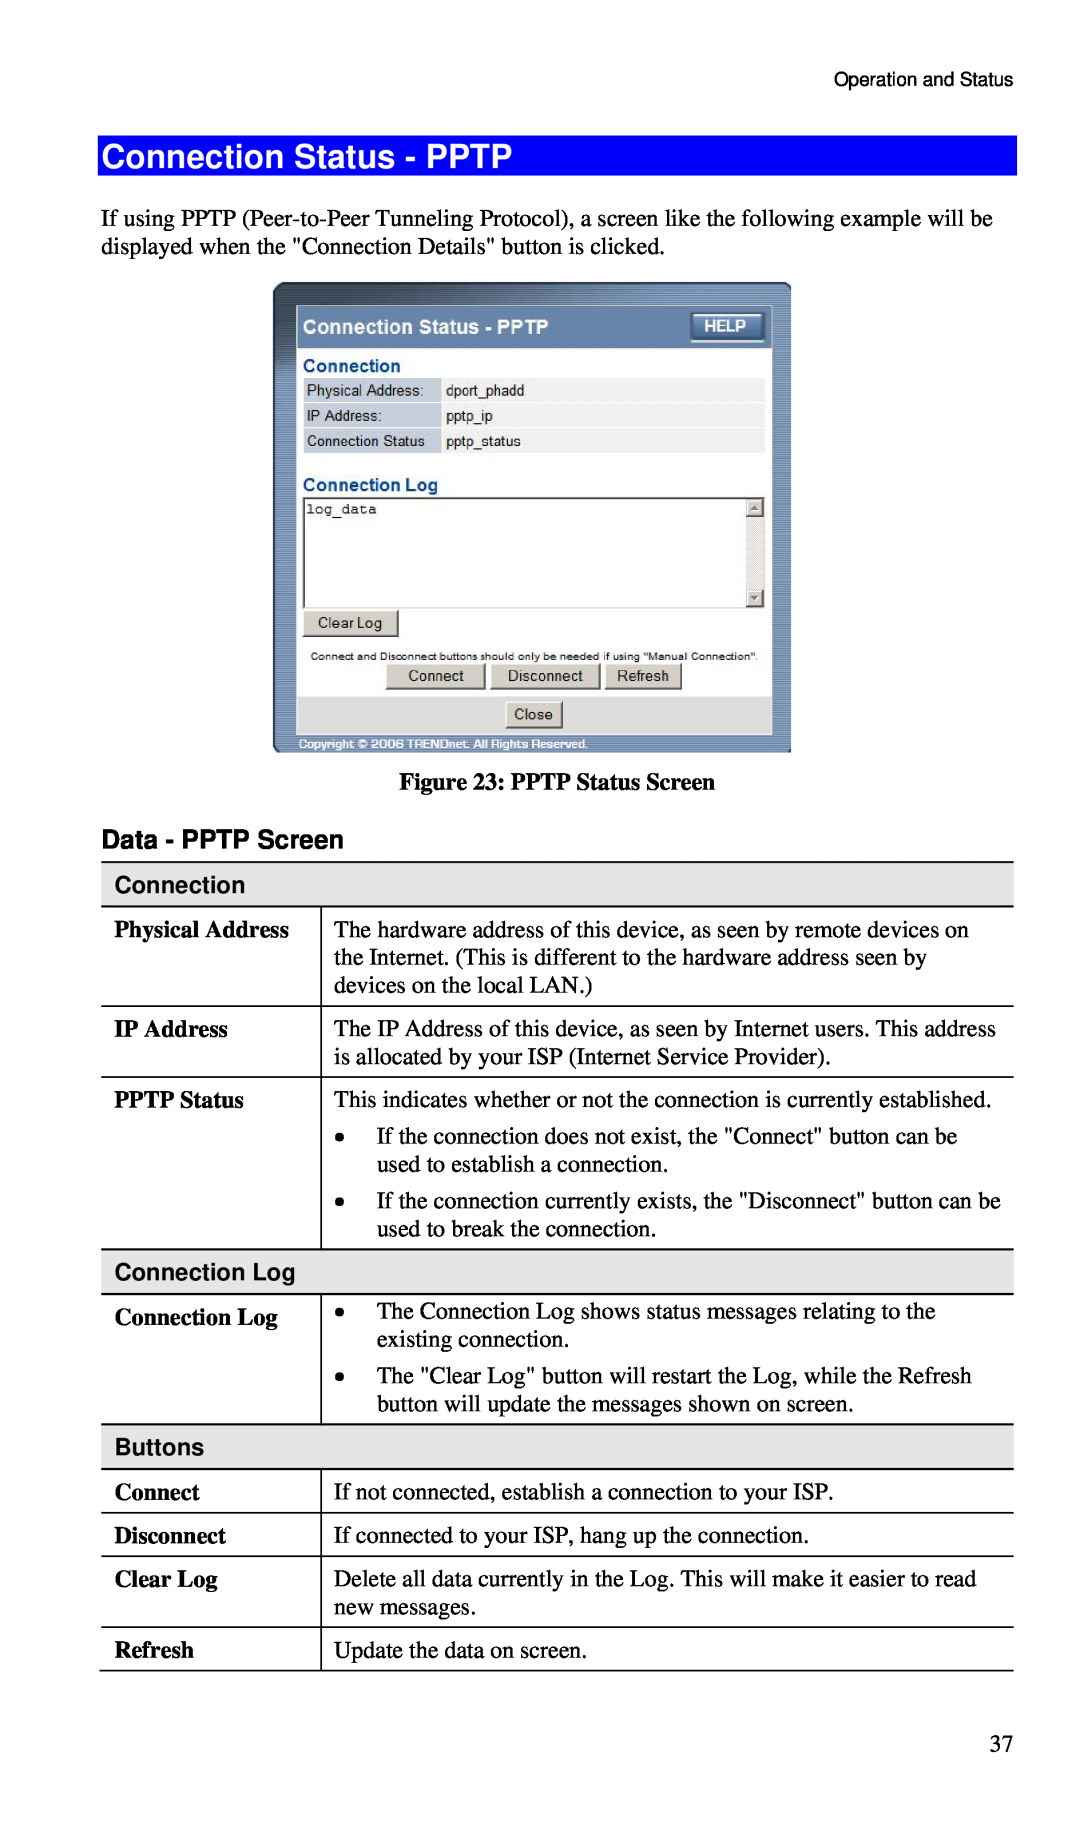 TRENDnet BRF114 manual Connection Status - PPTP, PPTP Status Screen, Physical Address, IP Address, Connection Log, Buttons 